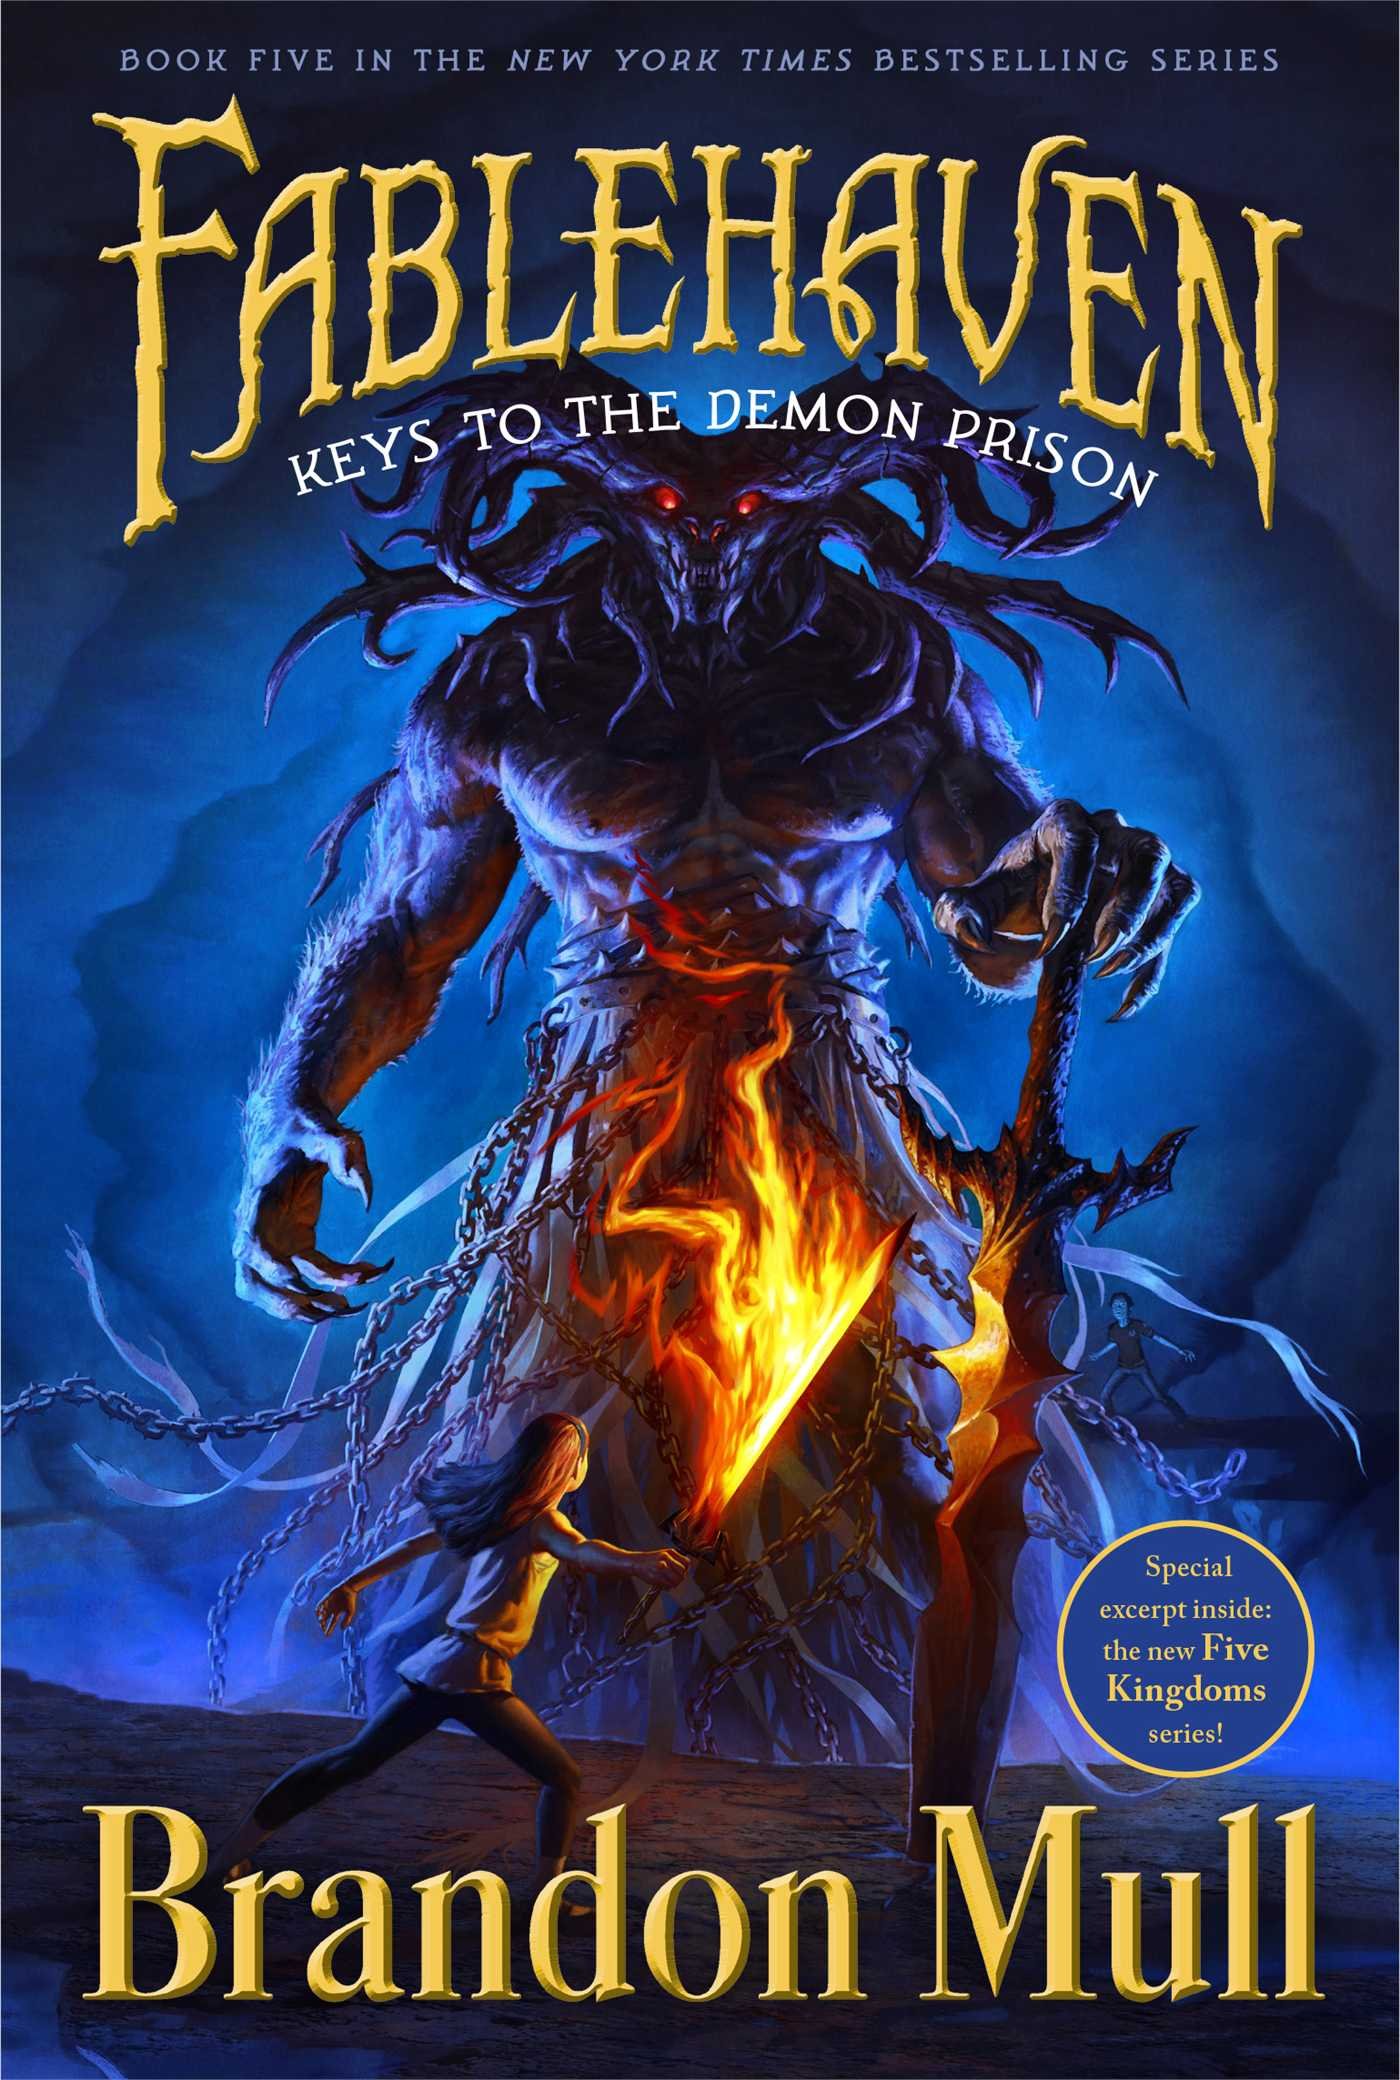 fablehaven keys to the demon prison audiobook